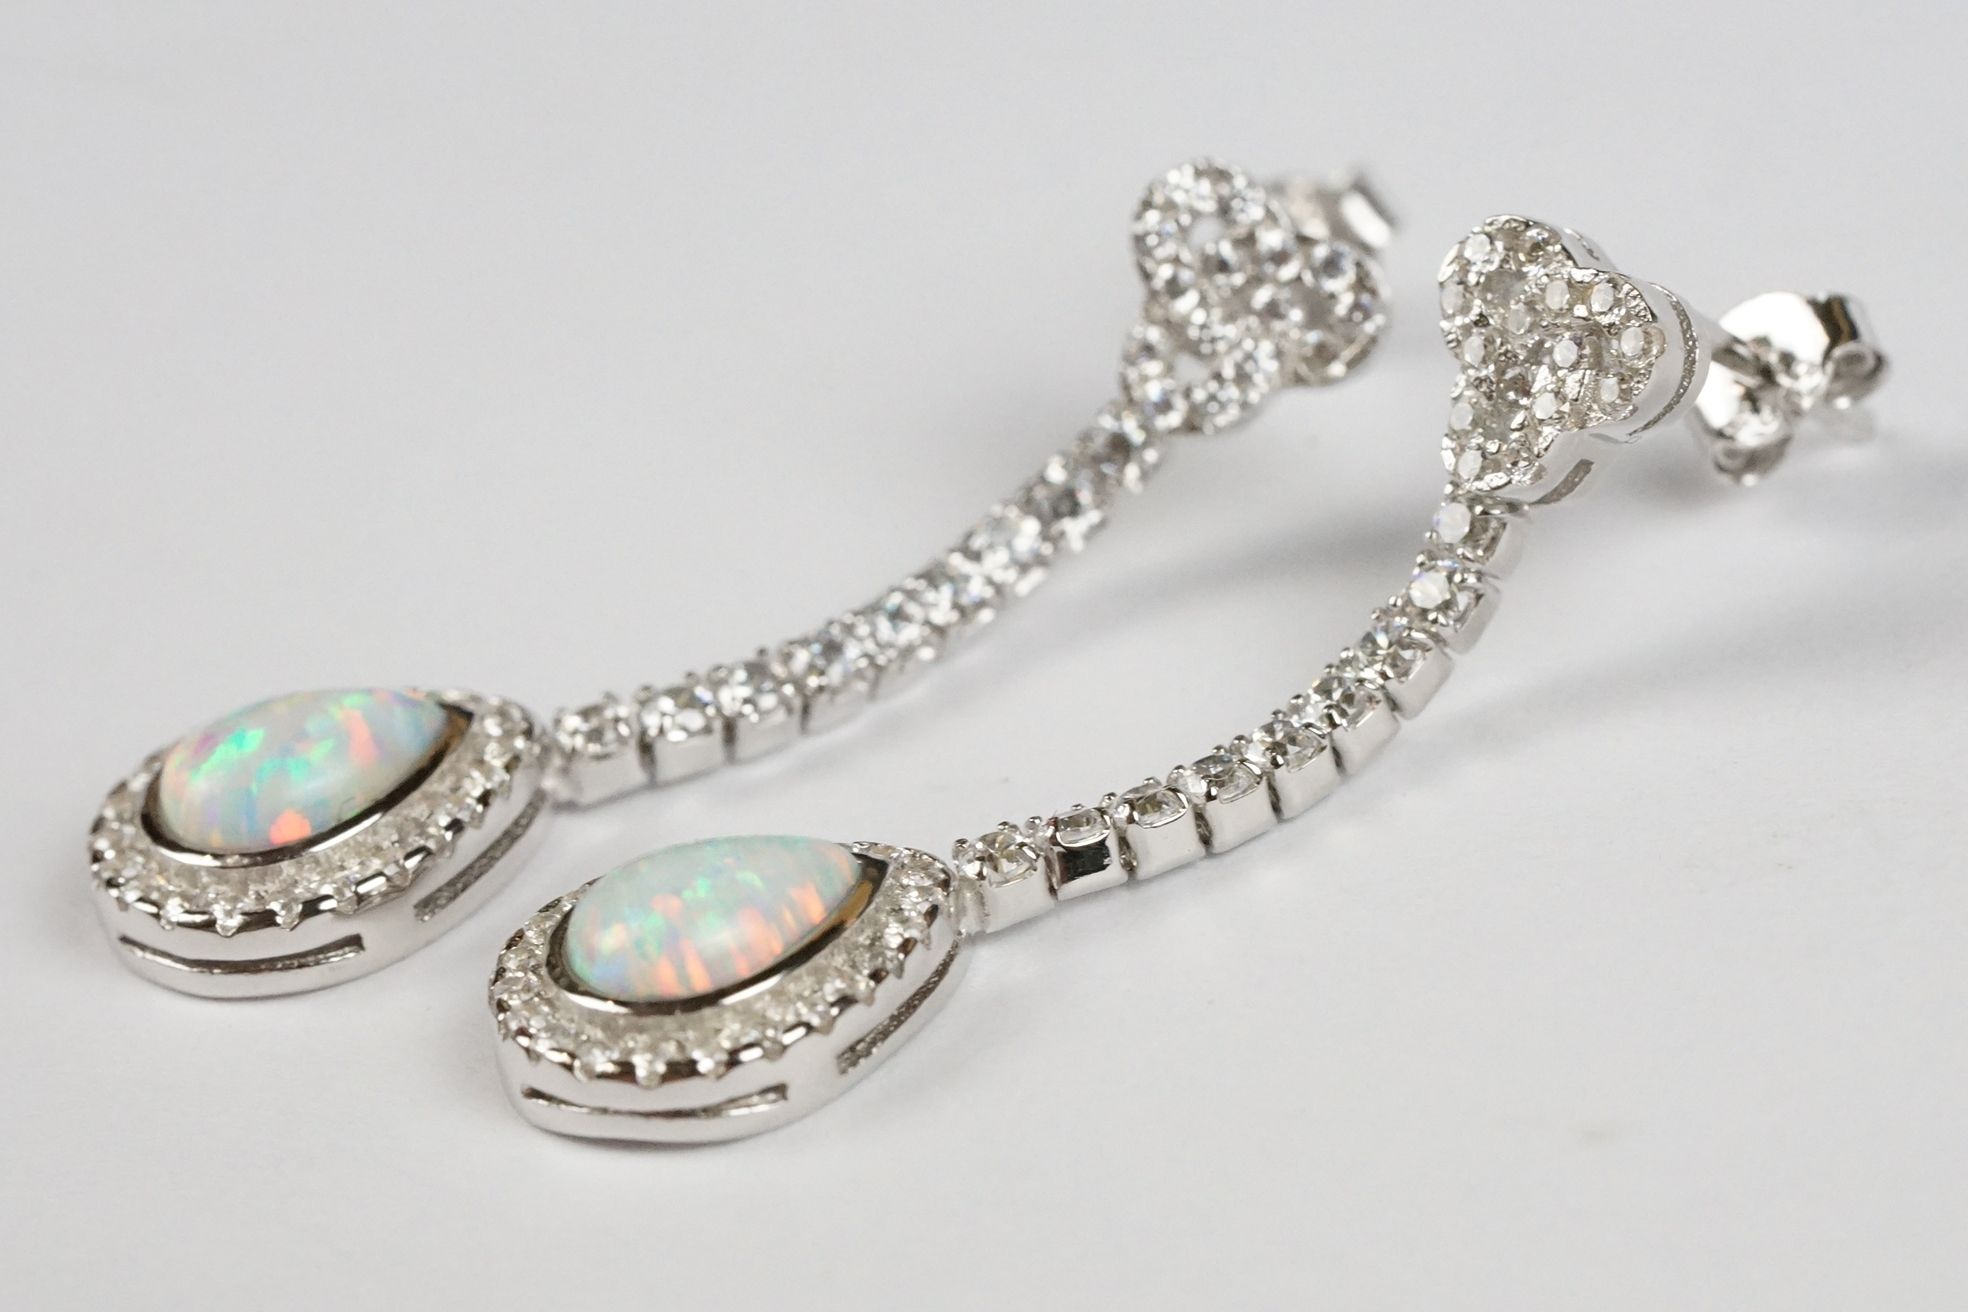 Pair of Silver CZ and Opal Drop Earrings - Image 2 of 4